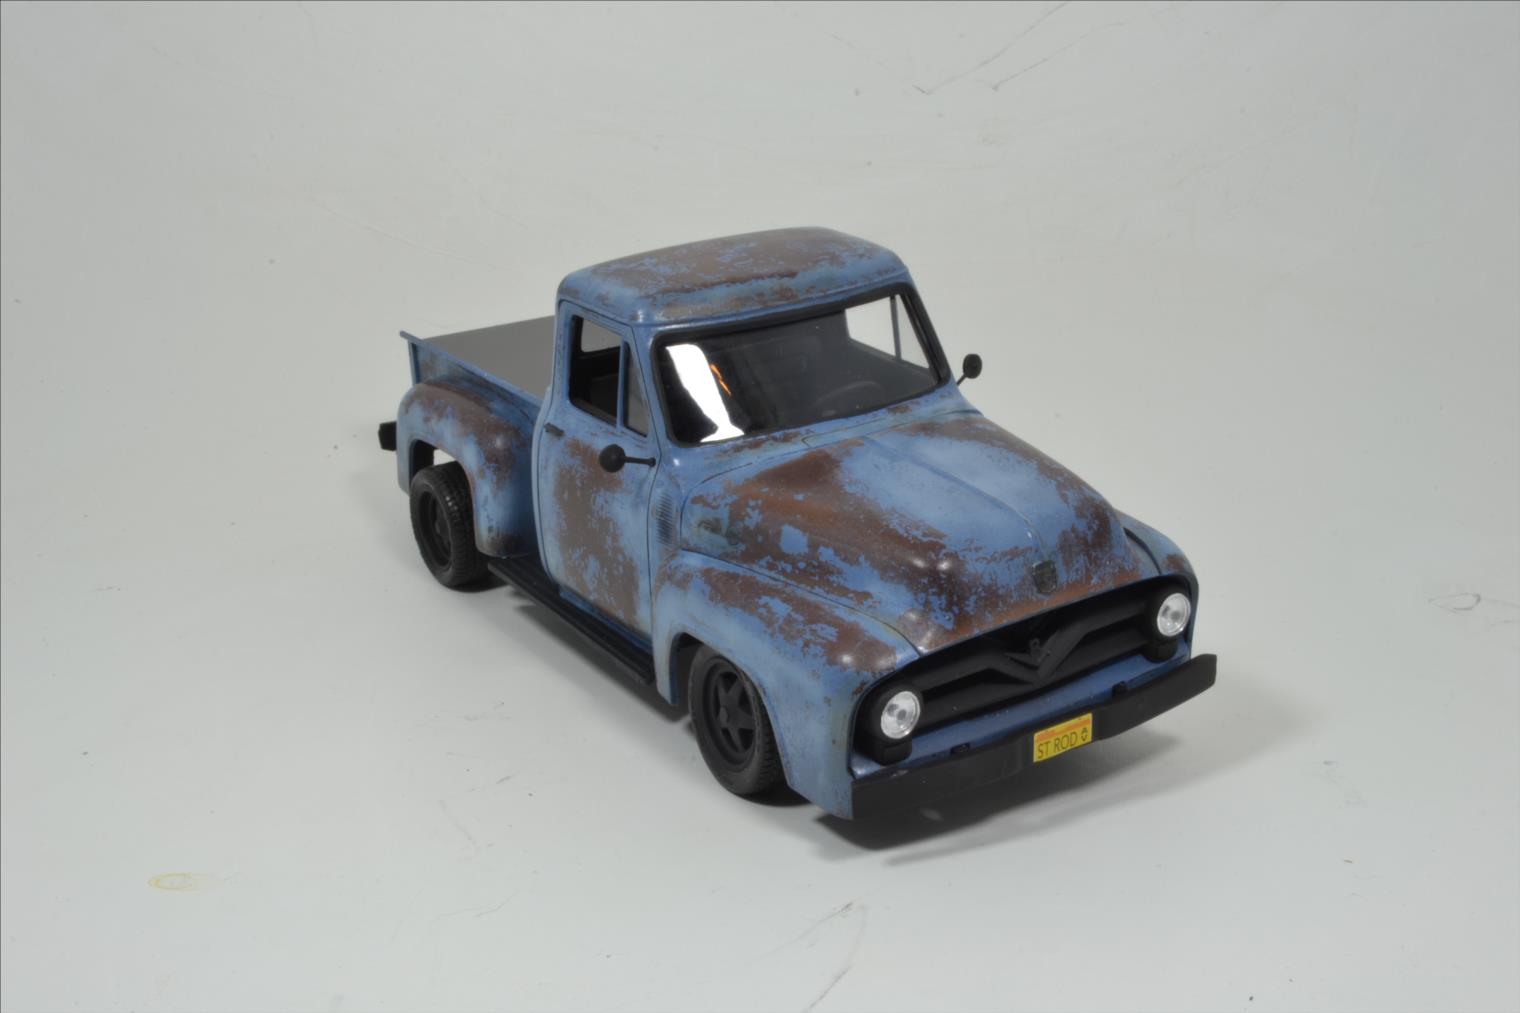  ROD FORD F100 (1/24 MONOGRAM) - Page 2 20041410174422494216744380